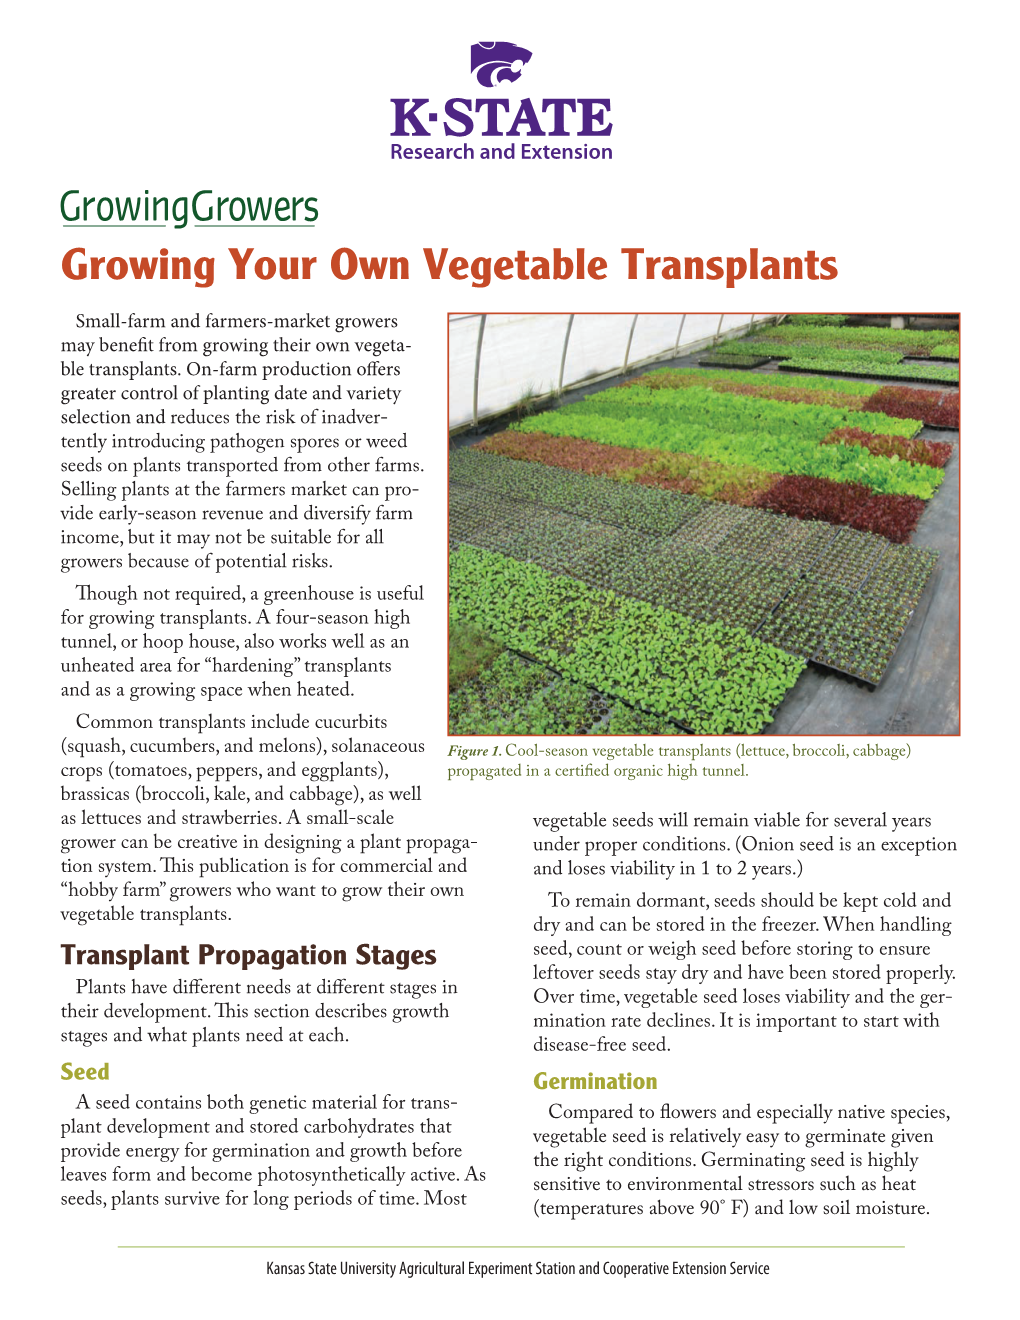 Growing Your Own Vegetable Transplants